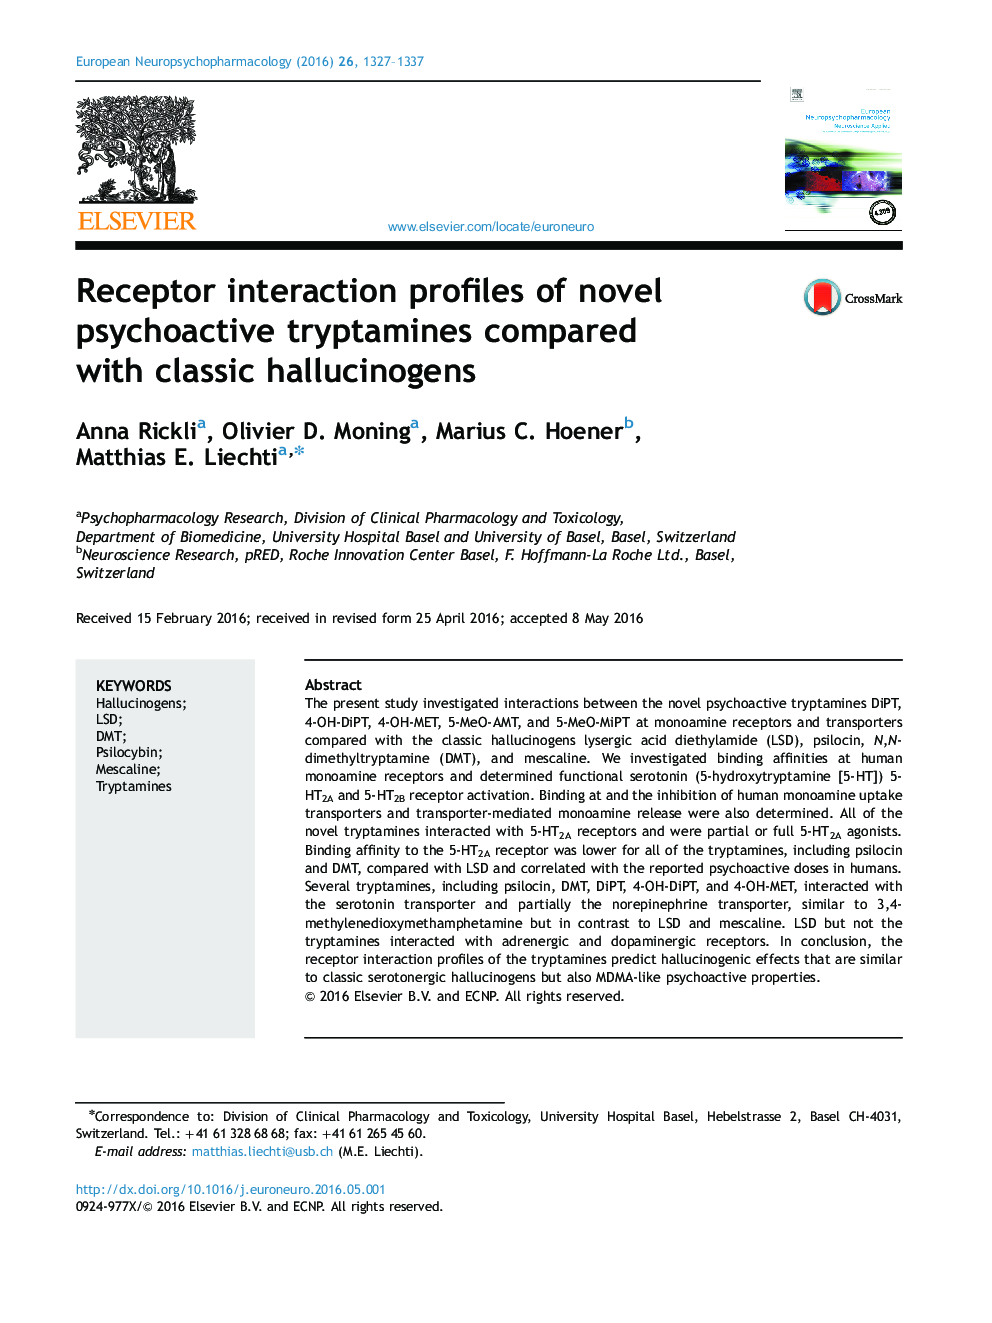 Receptor interaction profiles of novel psychoactive tryptamines compared with classic hallucinogens